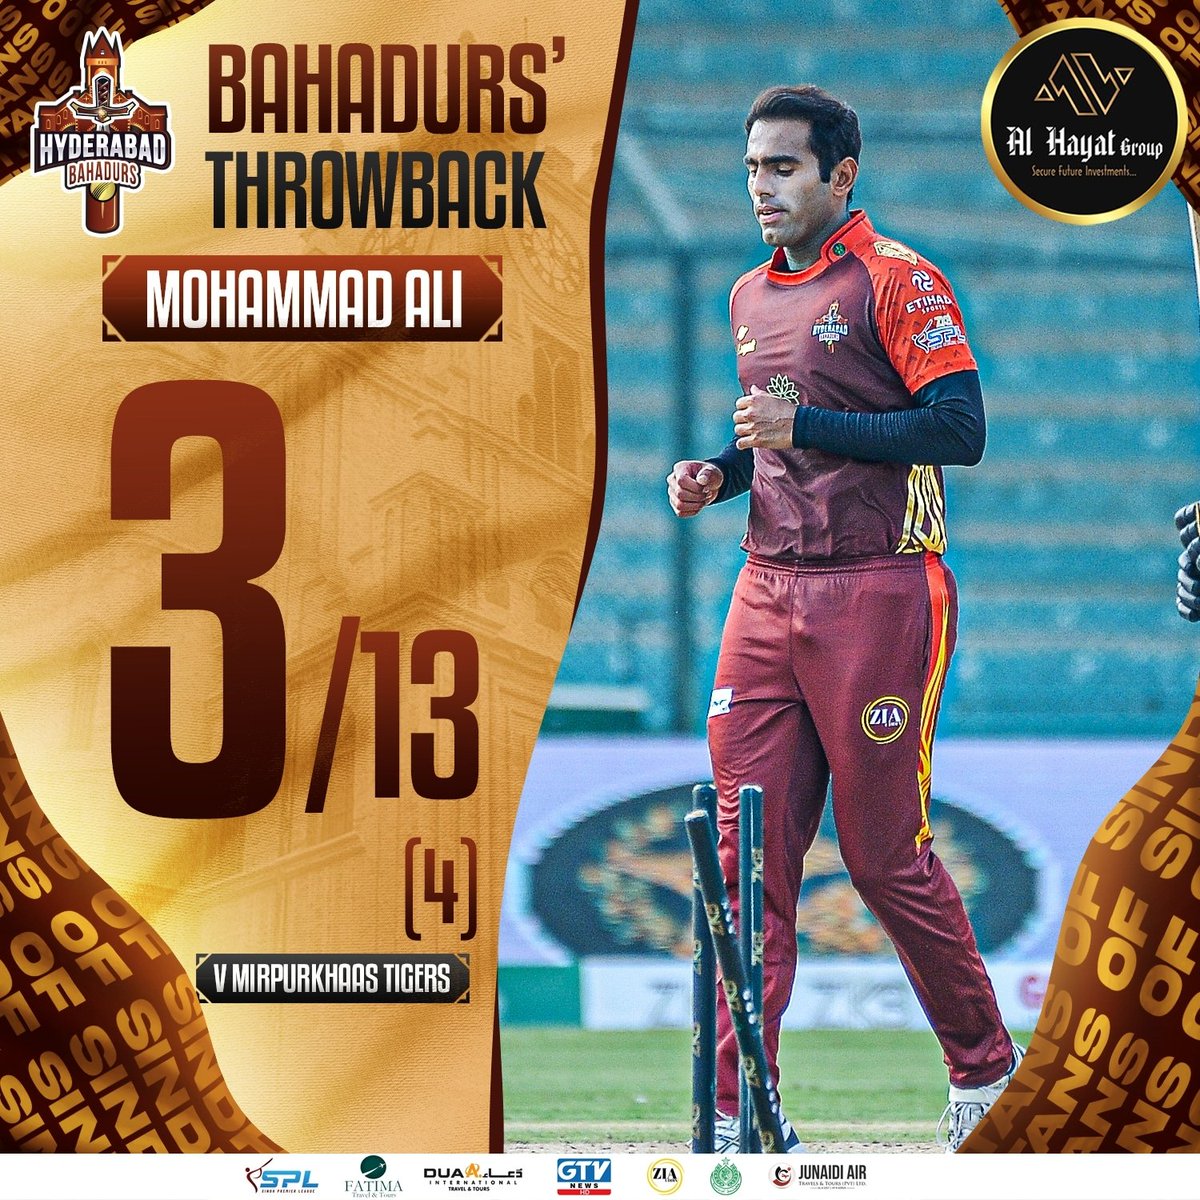 Just a bit back 🕰️

Our Bahadur, Mohammad Ali bagged 3 crucial wickets that came off in winning cause 🔥

#TitansOfSindh | #AlHayatGroup | #ZKBSPL